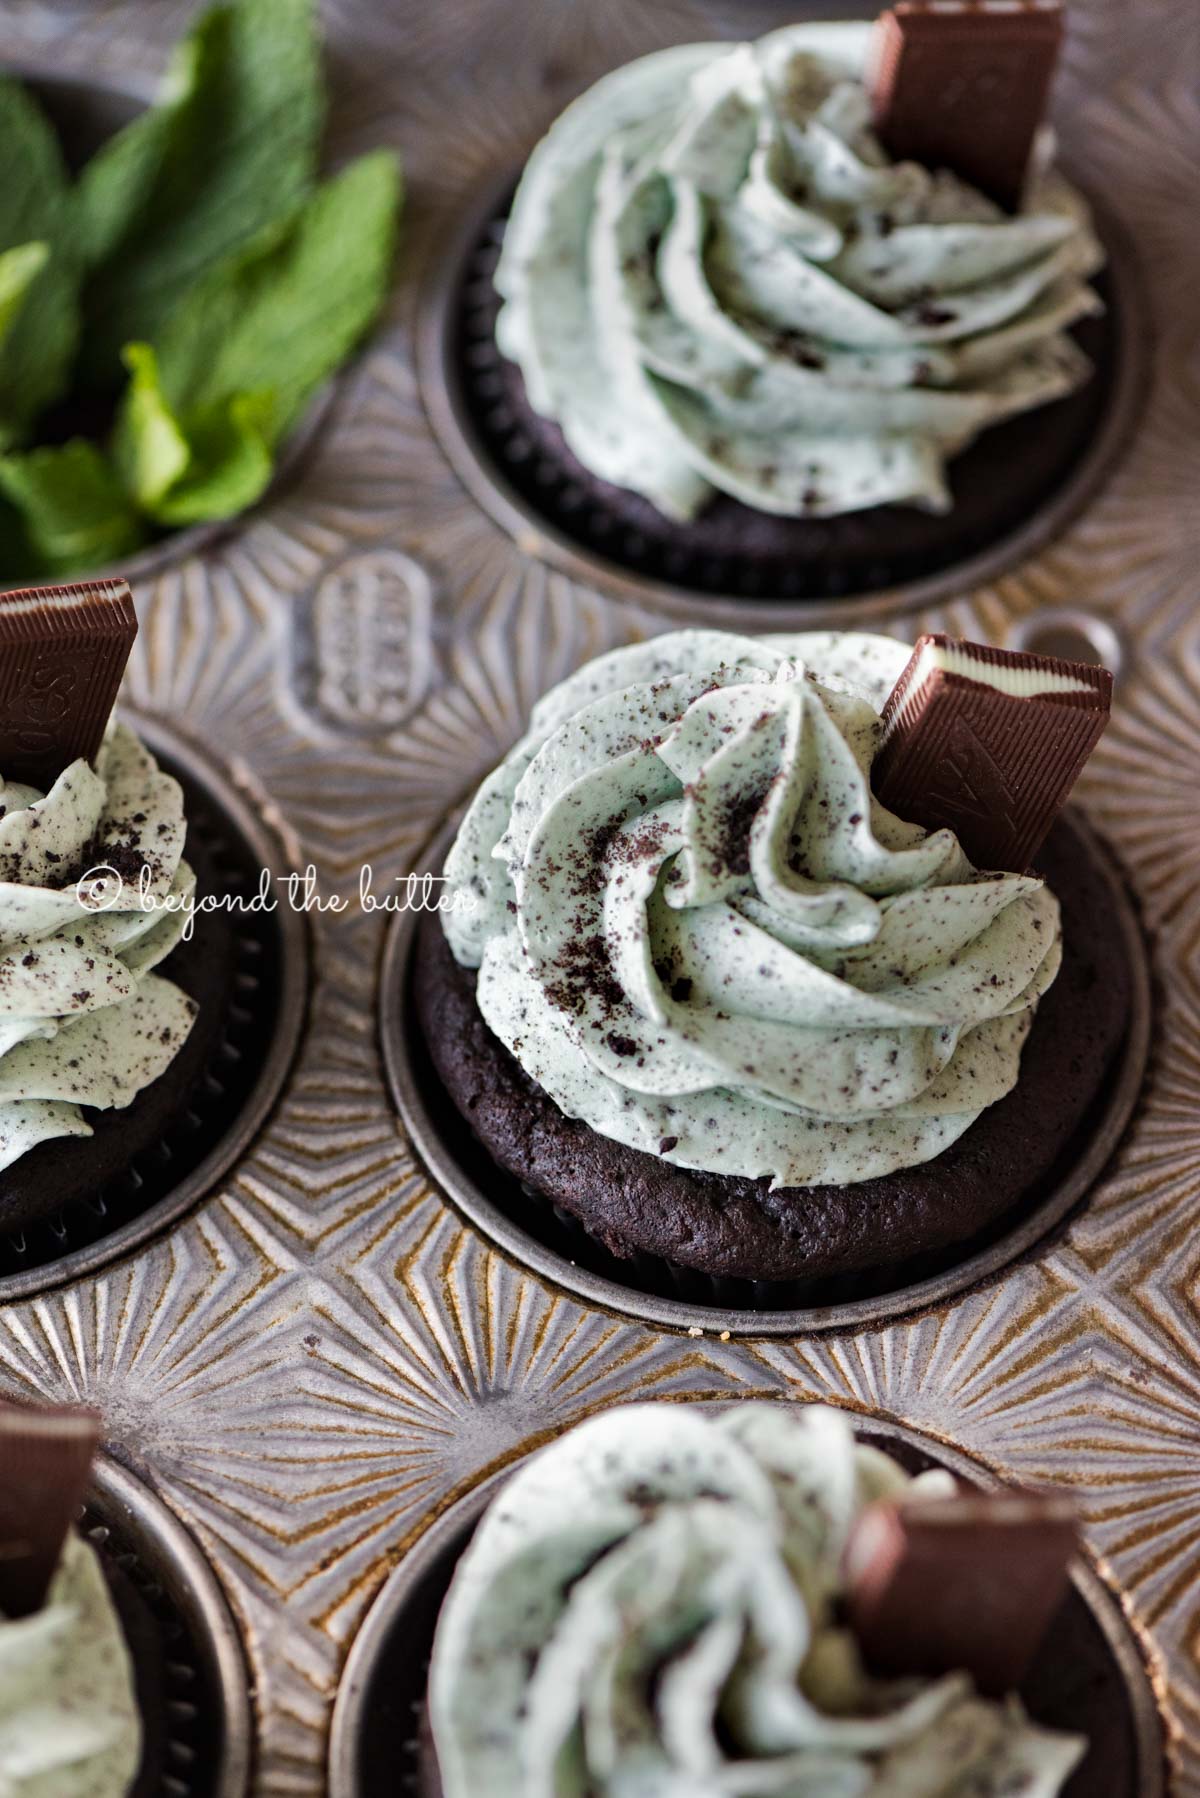 Vintage cupcake tin with mint chocolate cupcakes and mint for decoration | All Images © Beyond the Butter®